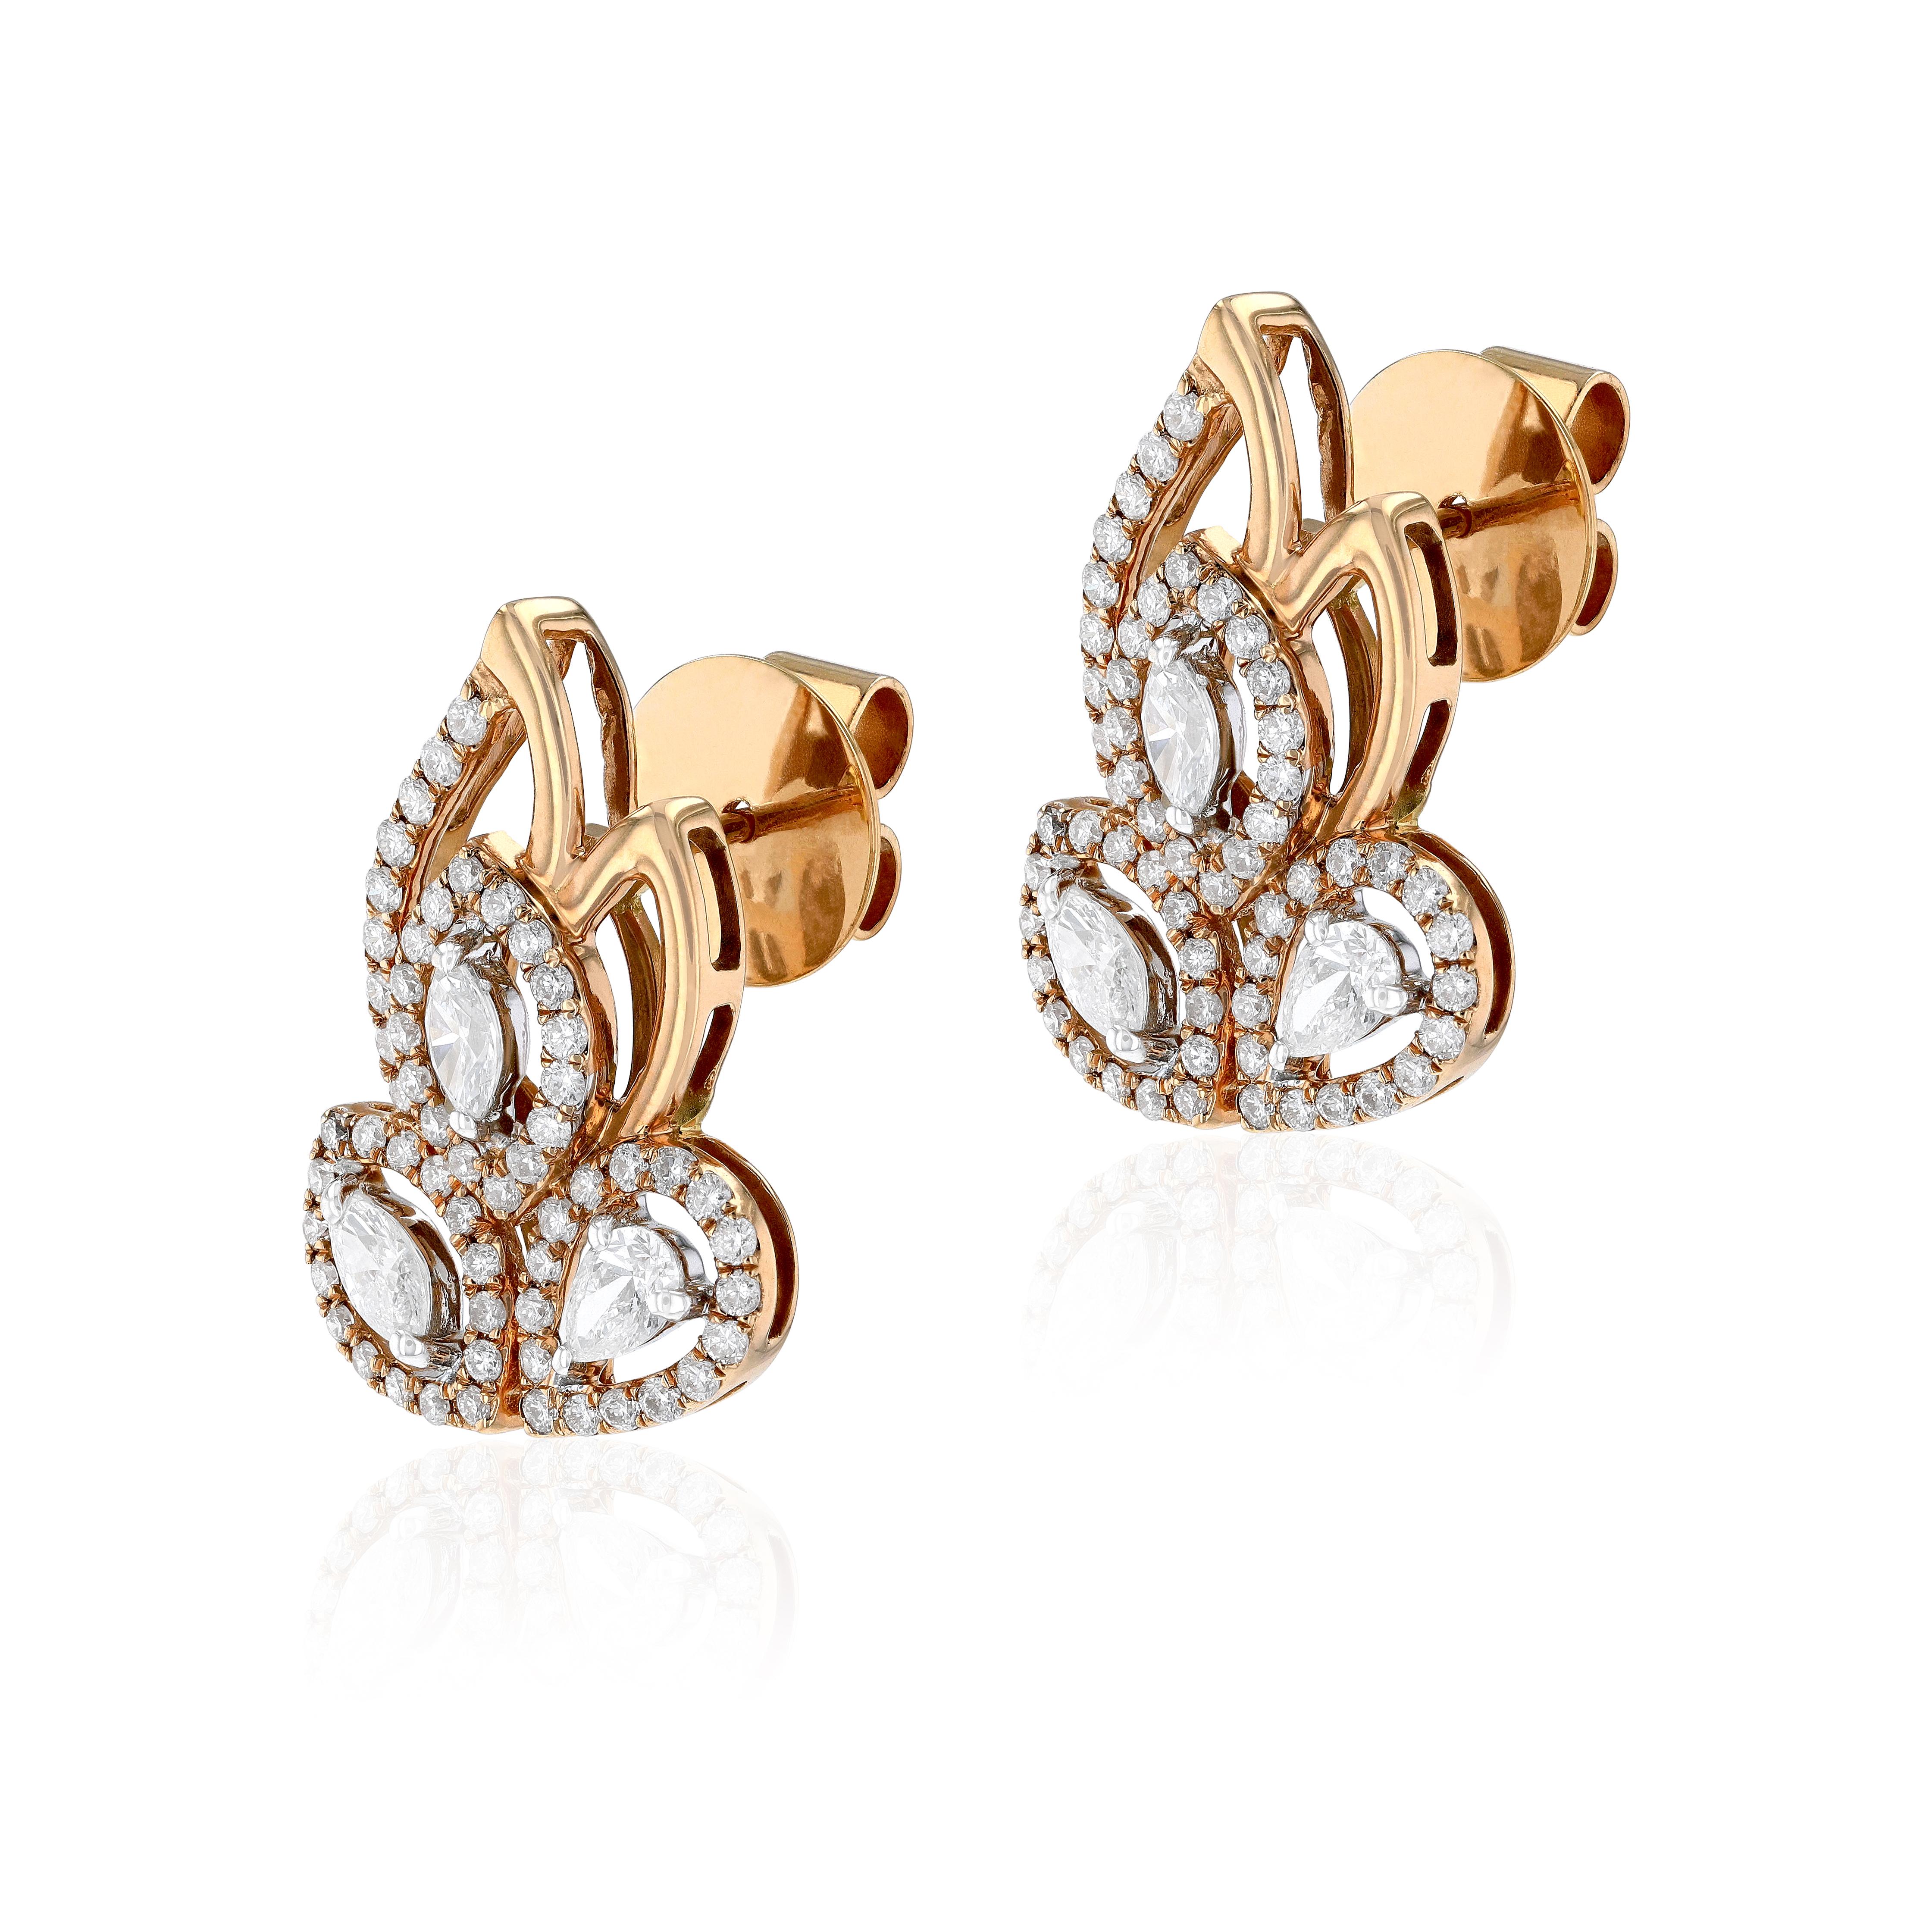 Combining exceptional artistry with extraordinary craftsmanship, our inspired by leaves earrings feature round, pear and marquise cut diamonds, set to form swirls of glance. Suspended from each are three beautifully articulated slices of pear and